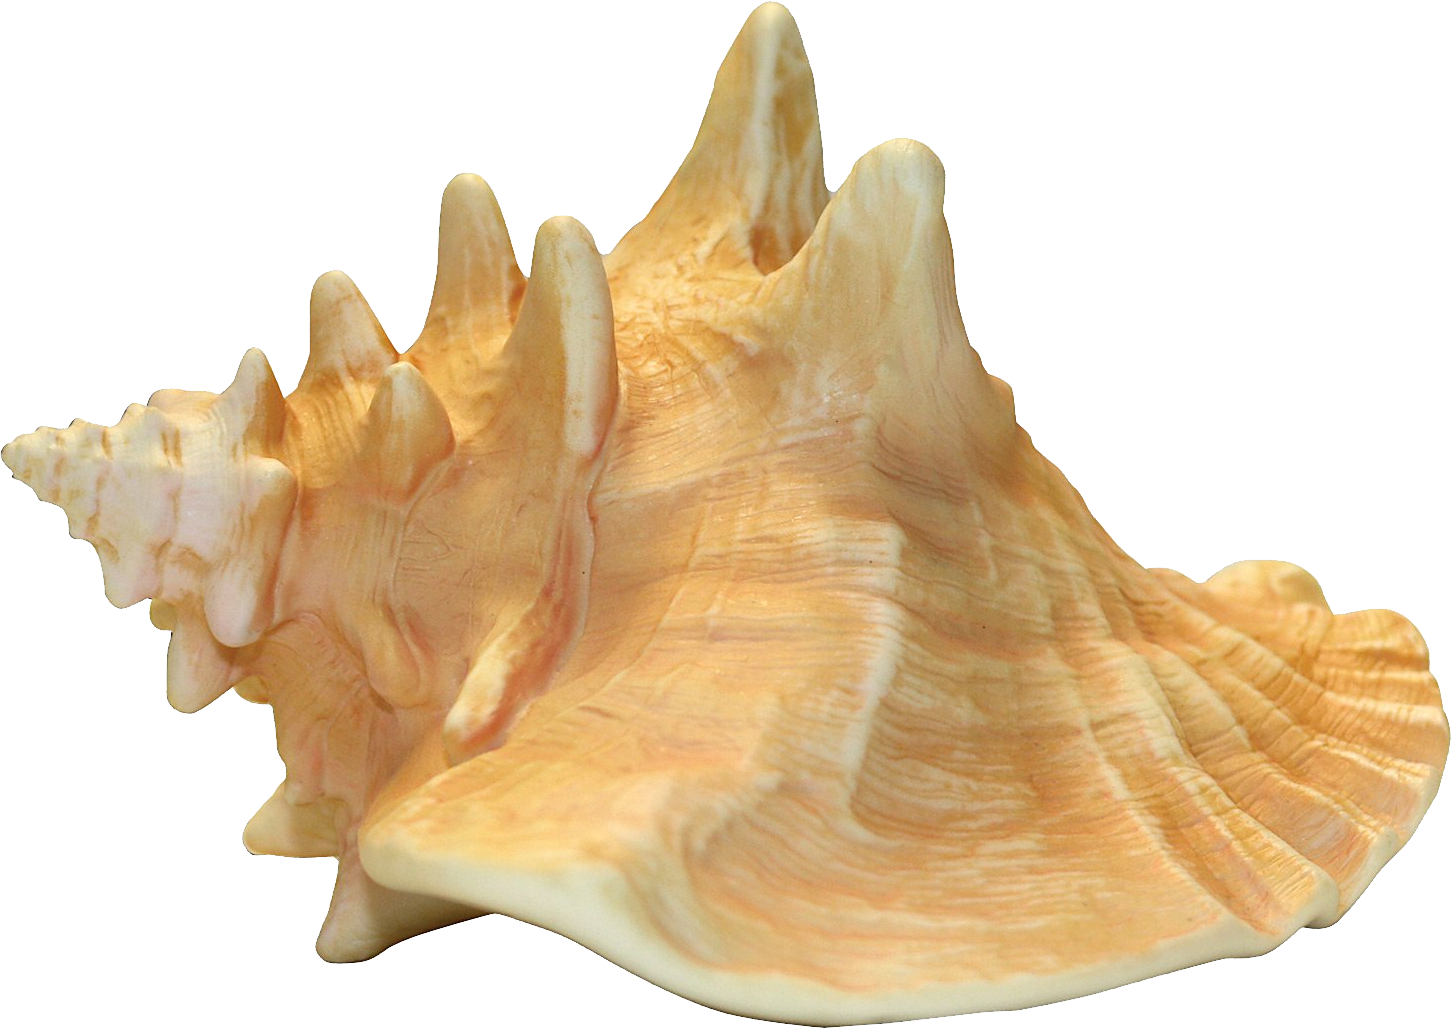 Sea Conch Snail Shell PNG Transparent Image